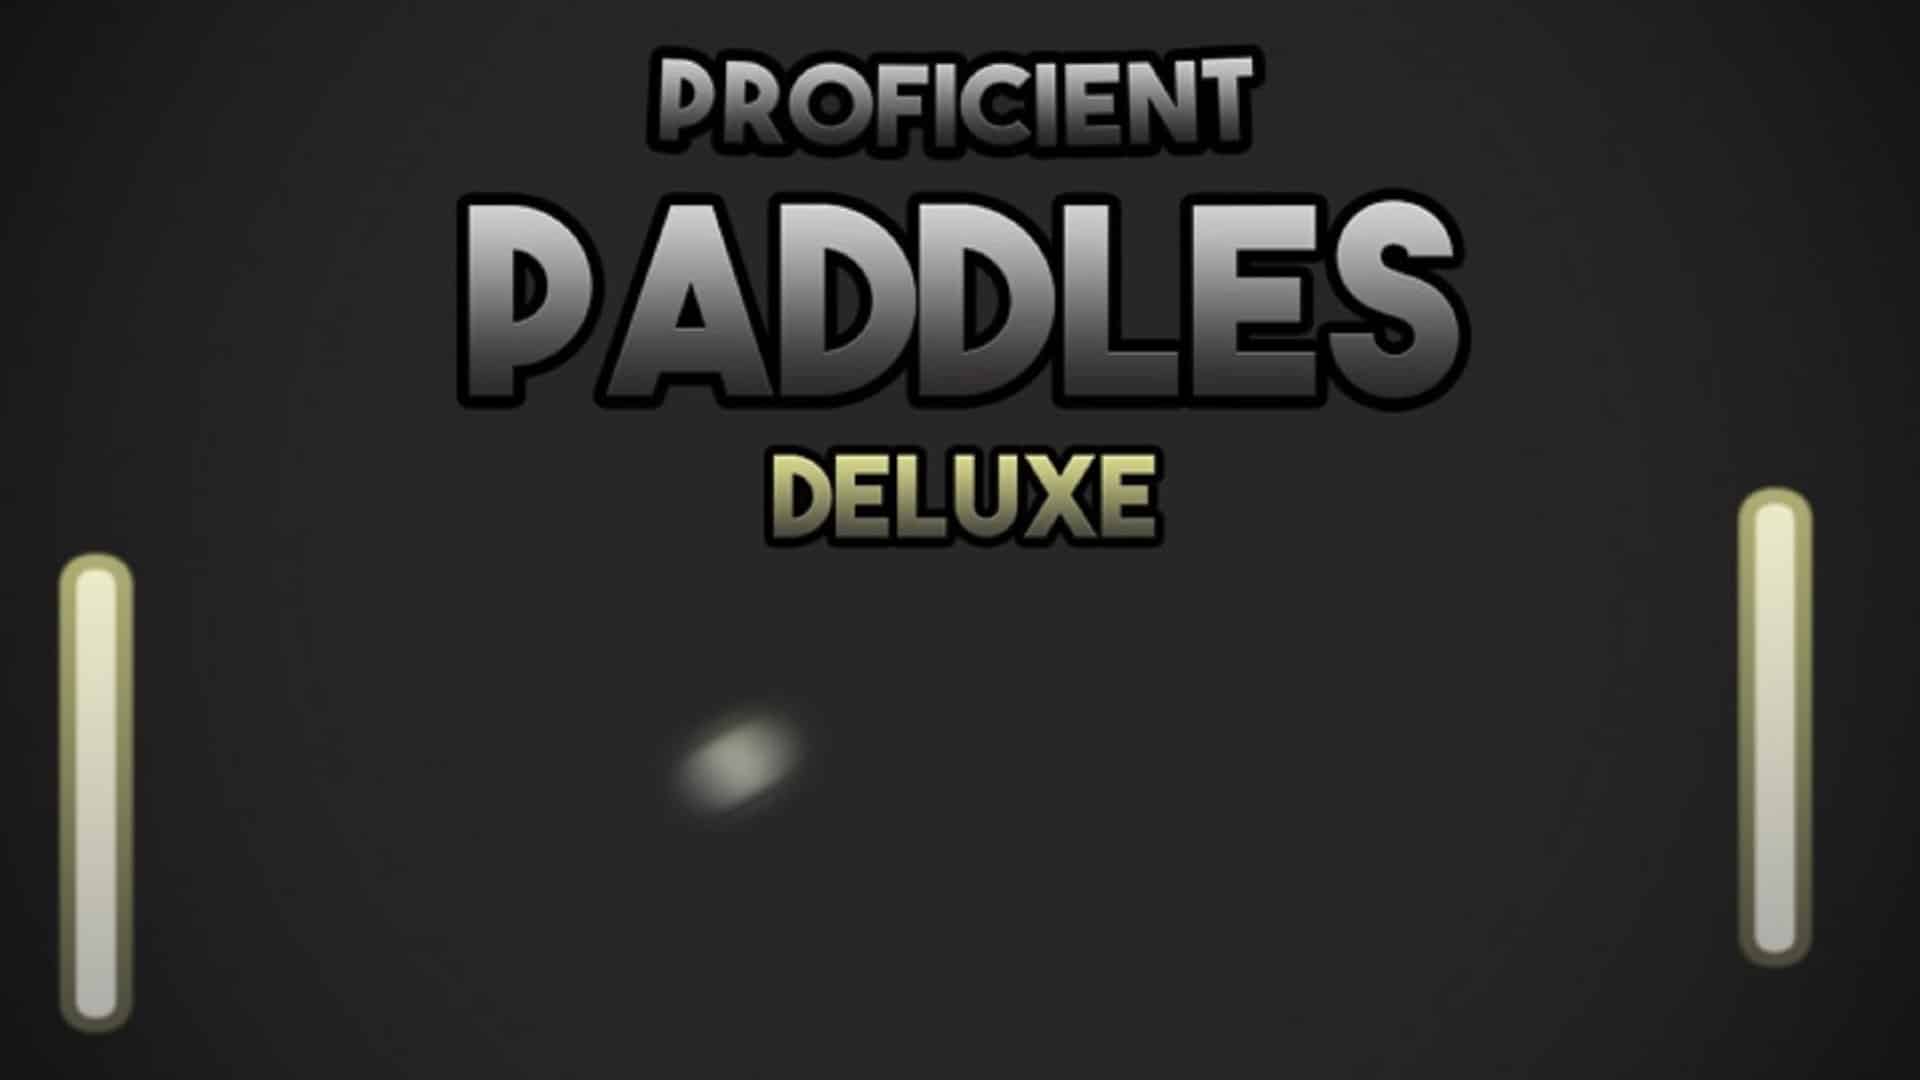 Proficient Paddles Deluxe player count stats